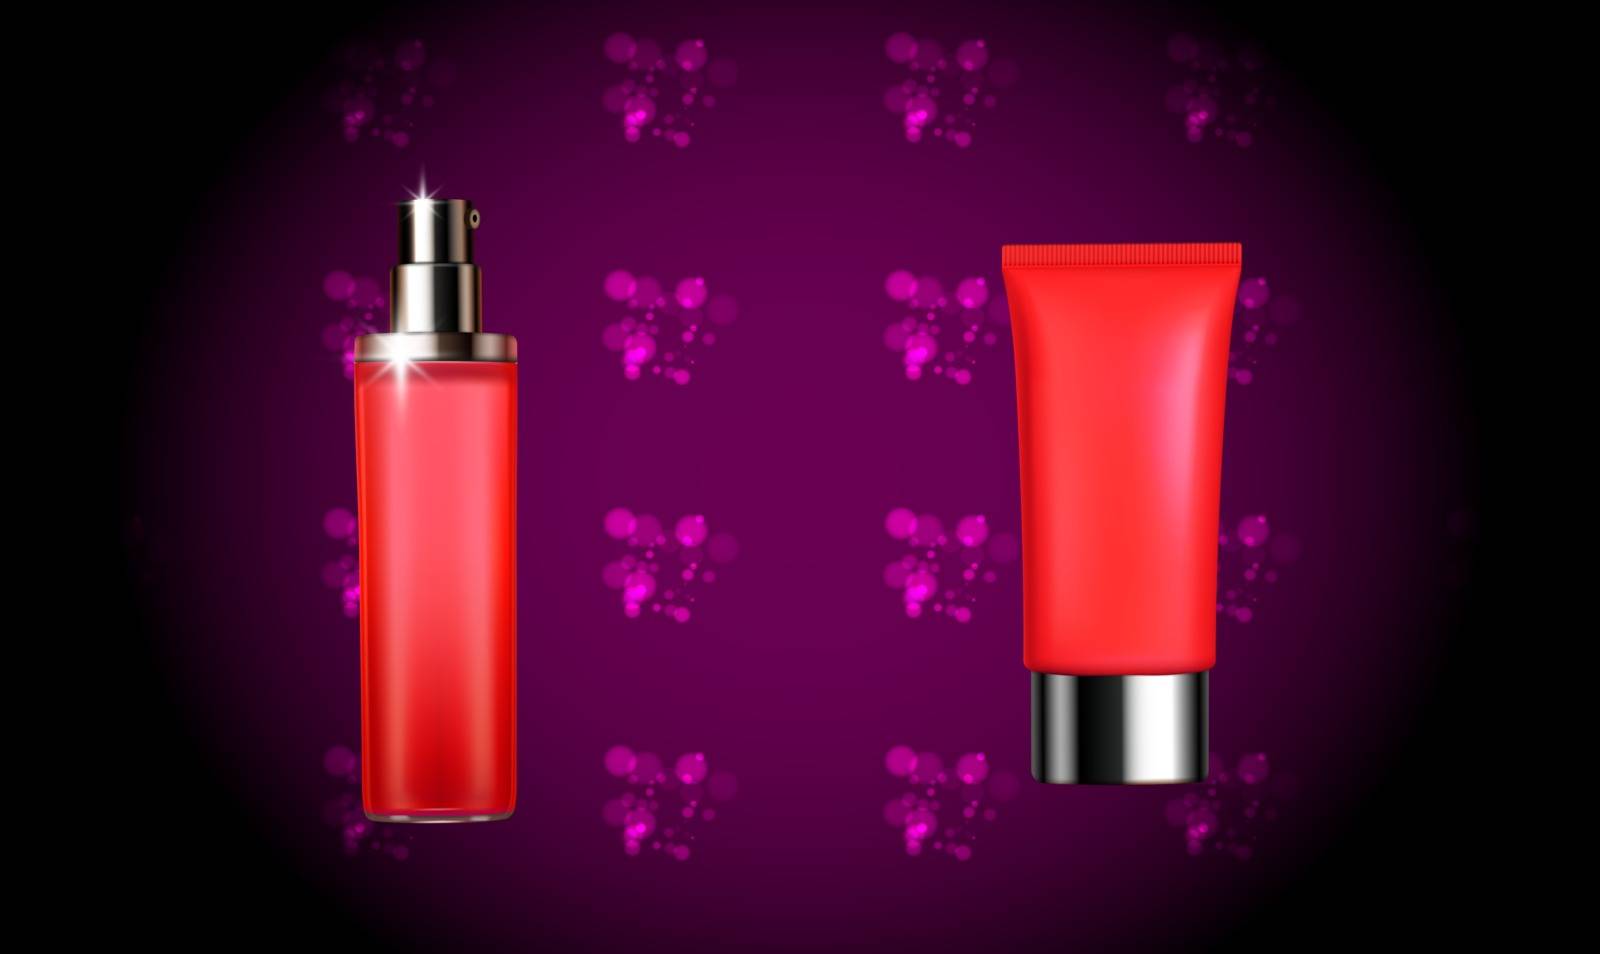 mock up illustration of a beauty product on abstract background